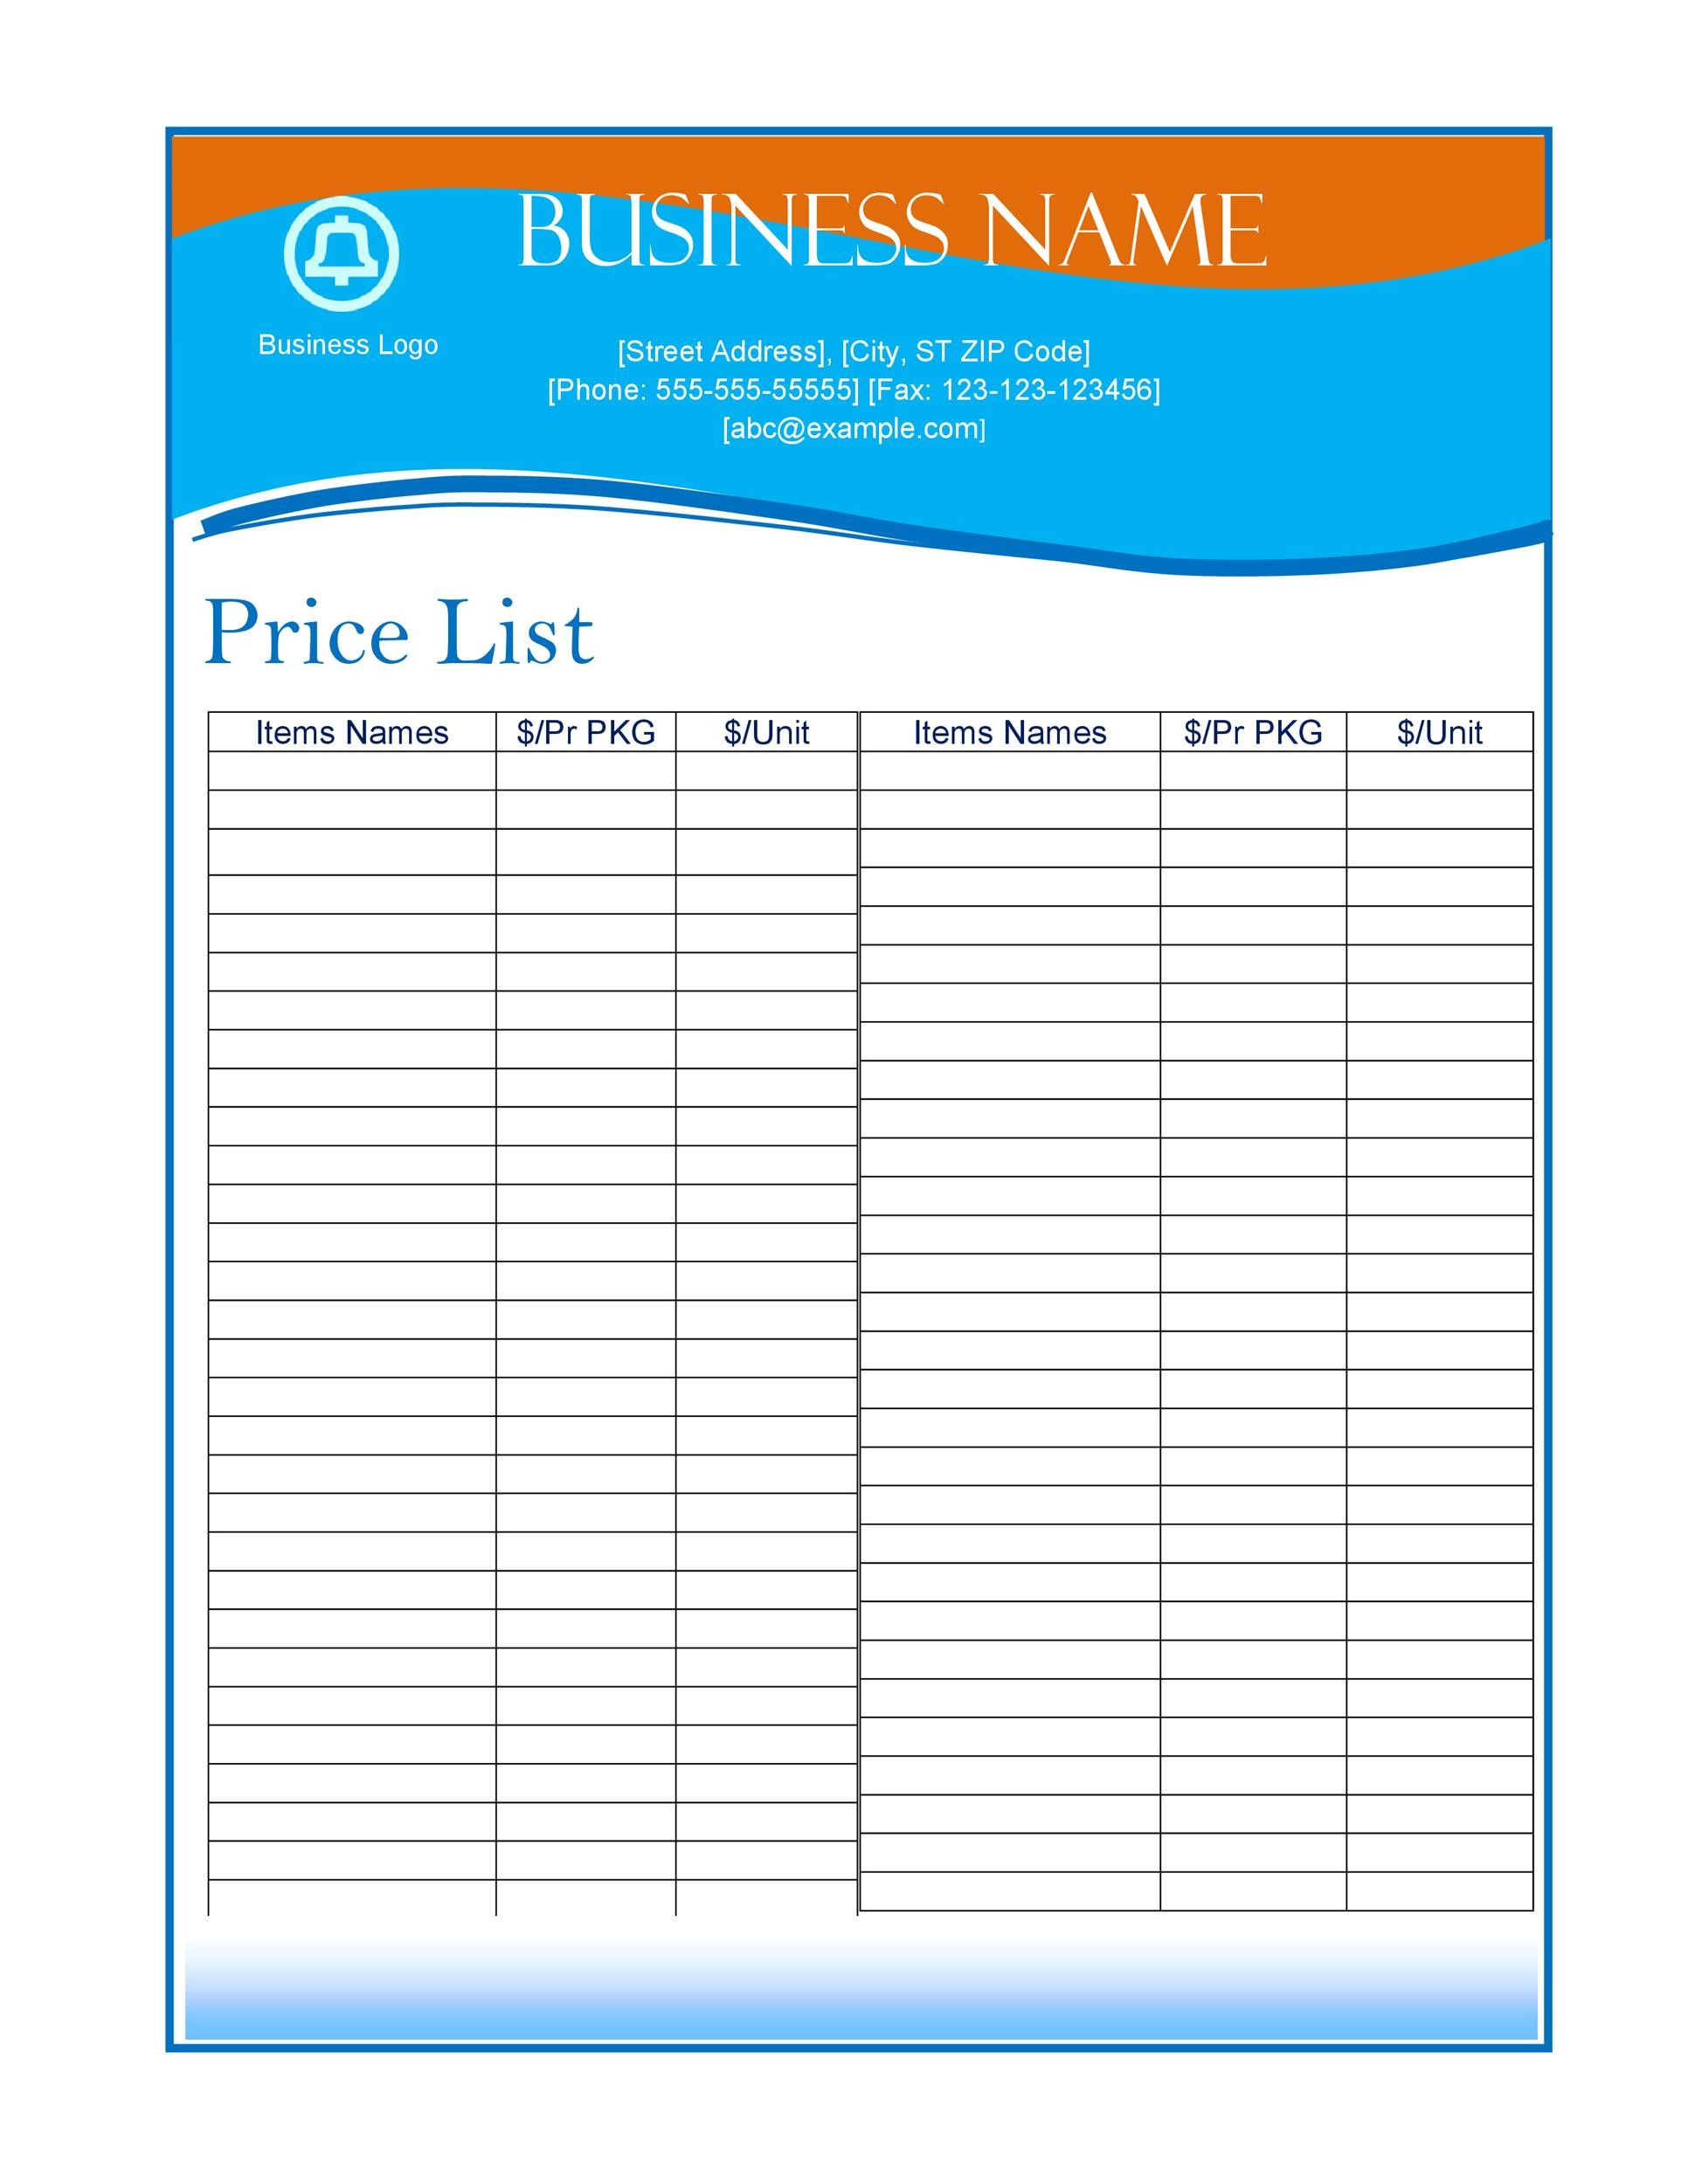 business-price-list-template-tutore-org-master-of-documents